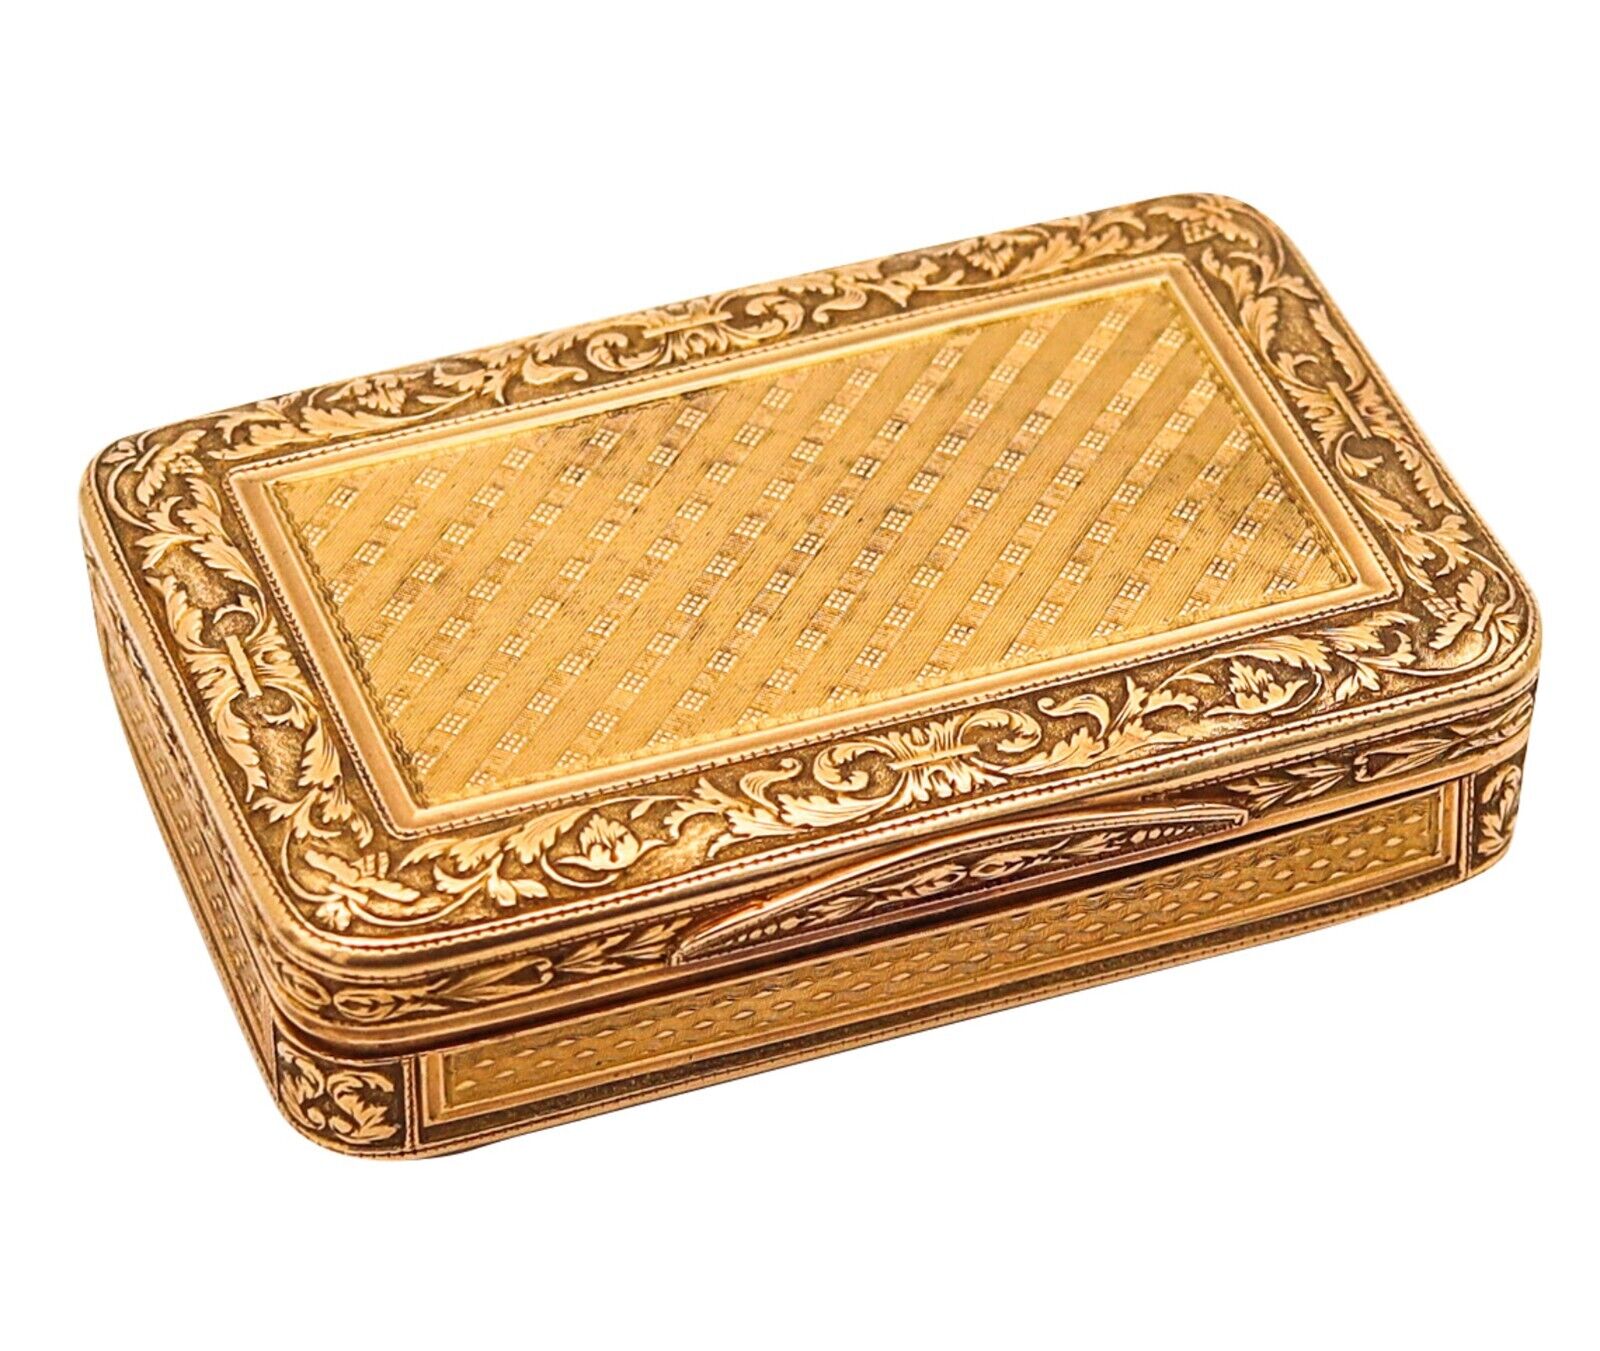 French 1790 Neoclassical Louis XVI Rectangular Snuff Box In Labrated 18Kt Yellow